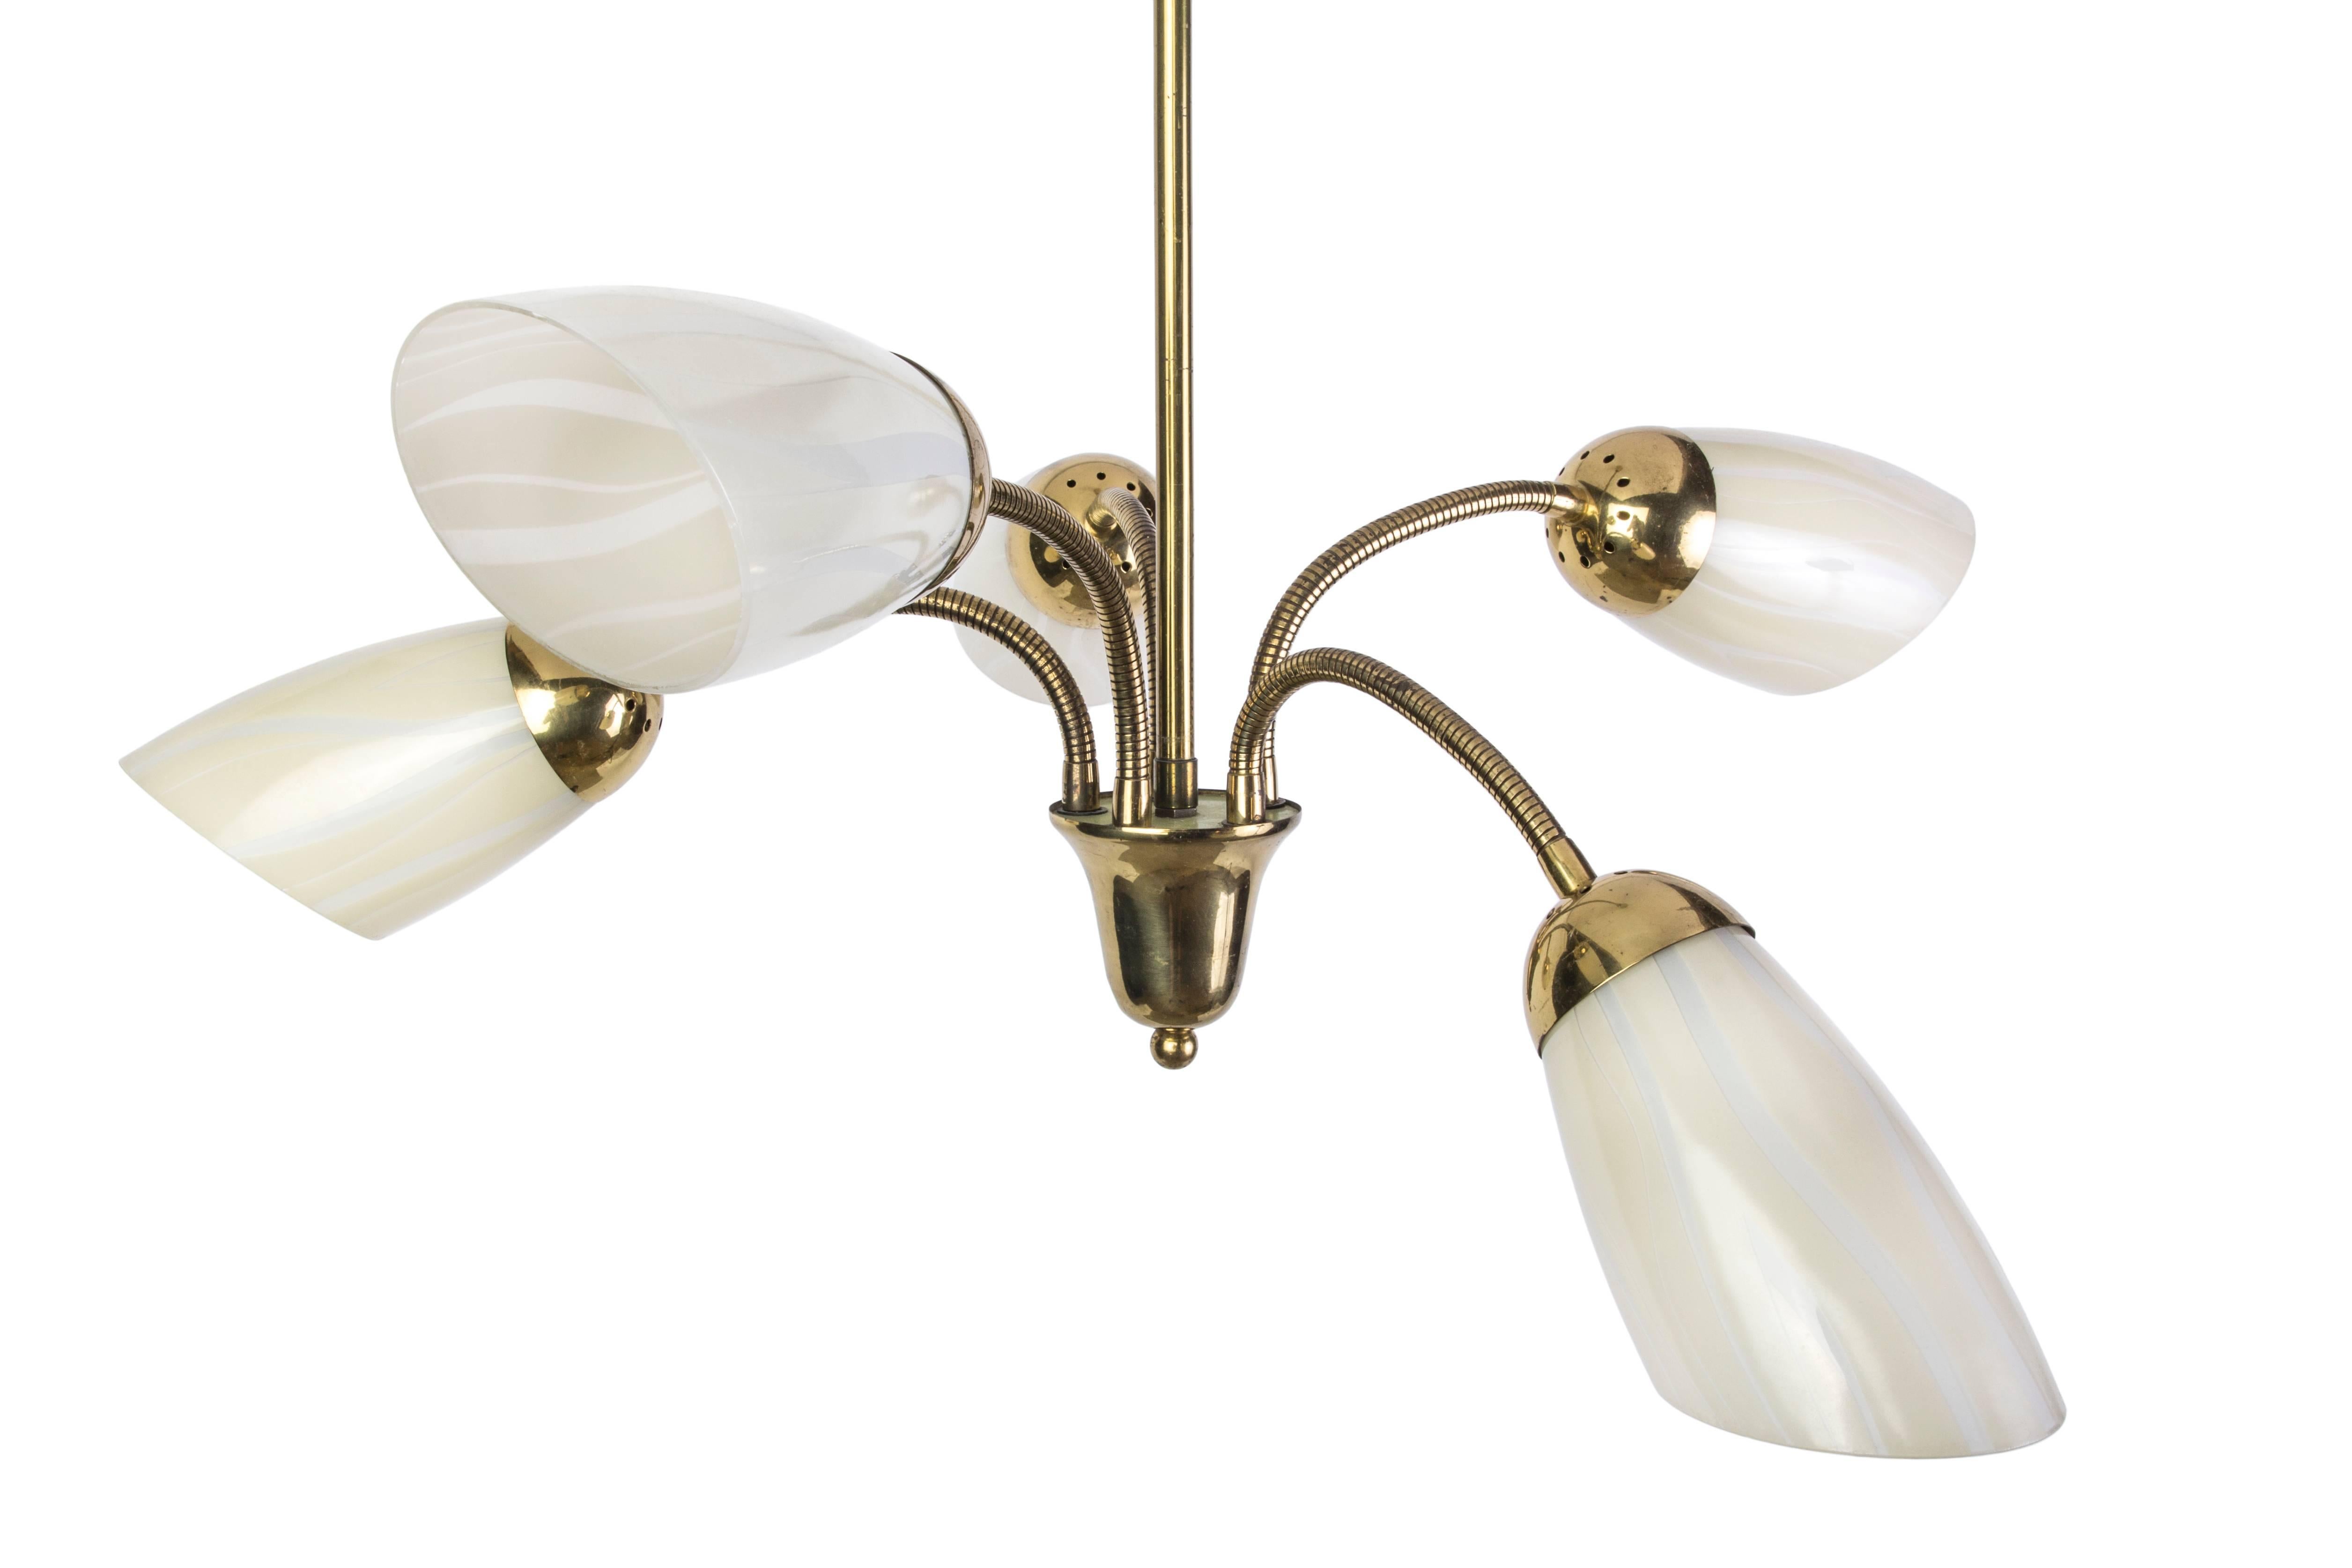 This chic Mid-Century Modernist chandelier features a spider form design brass frame and black details with five conical glass shades and adjustable multi-directional arms.

Made in Germany, circa 1950.